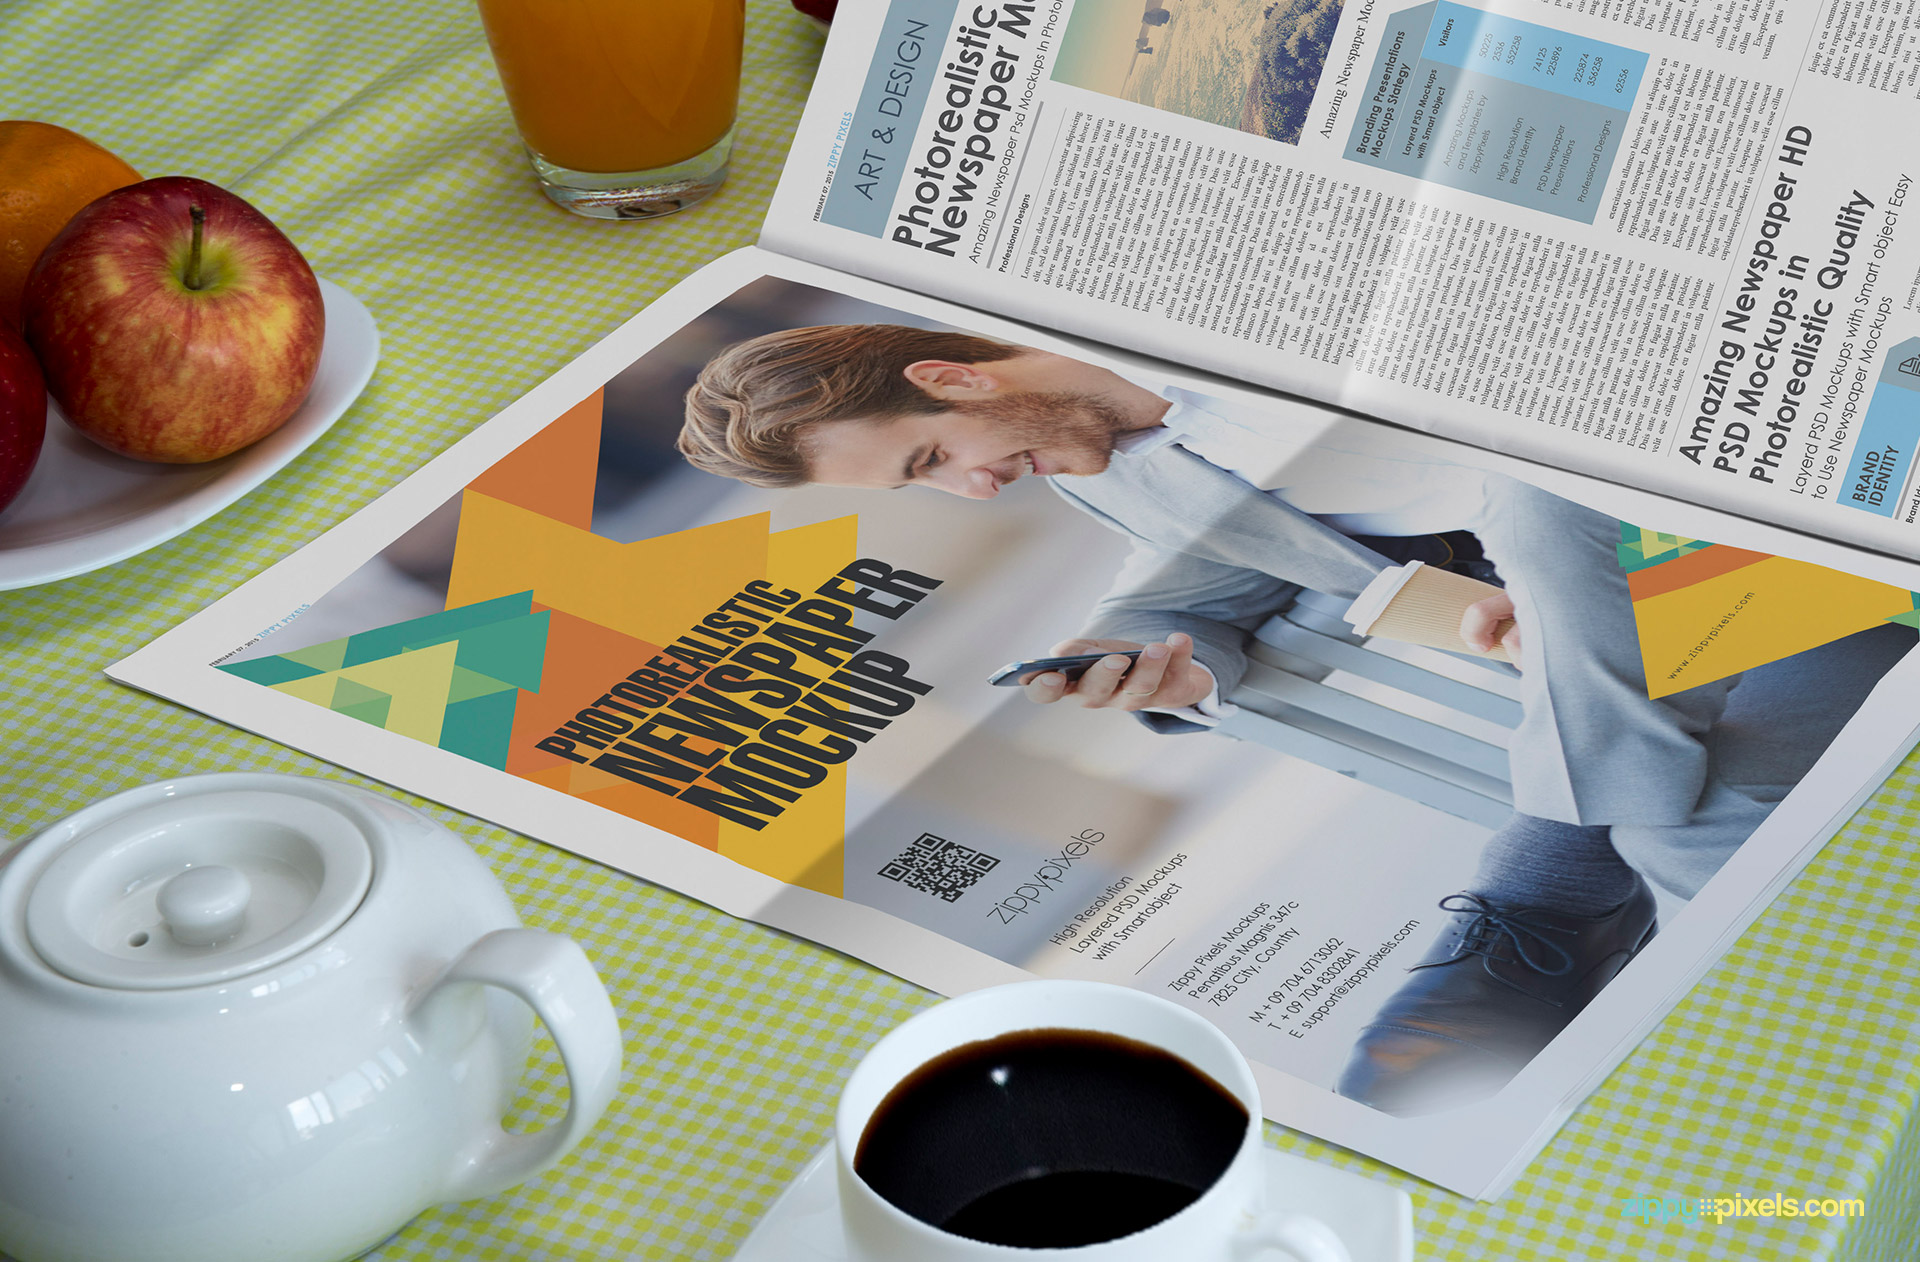 Newspaper Mockups for Full page newspaper ad showcase on breakfast table